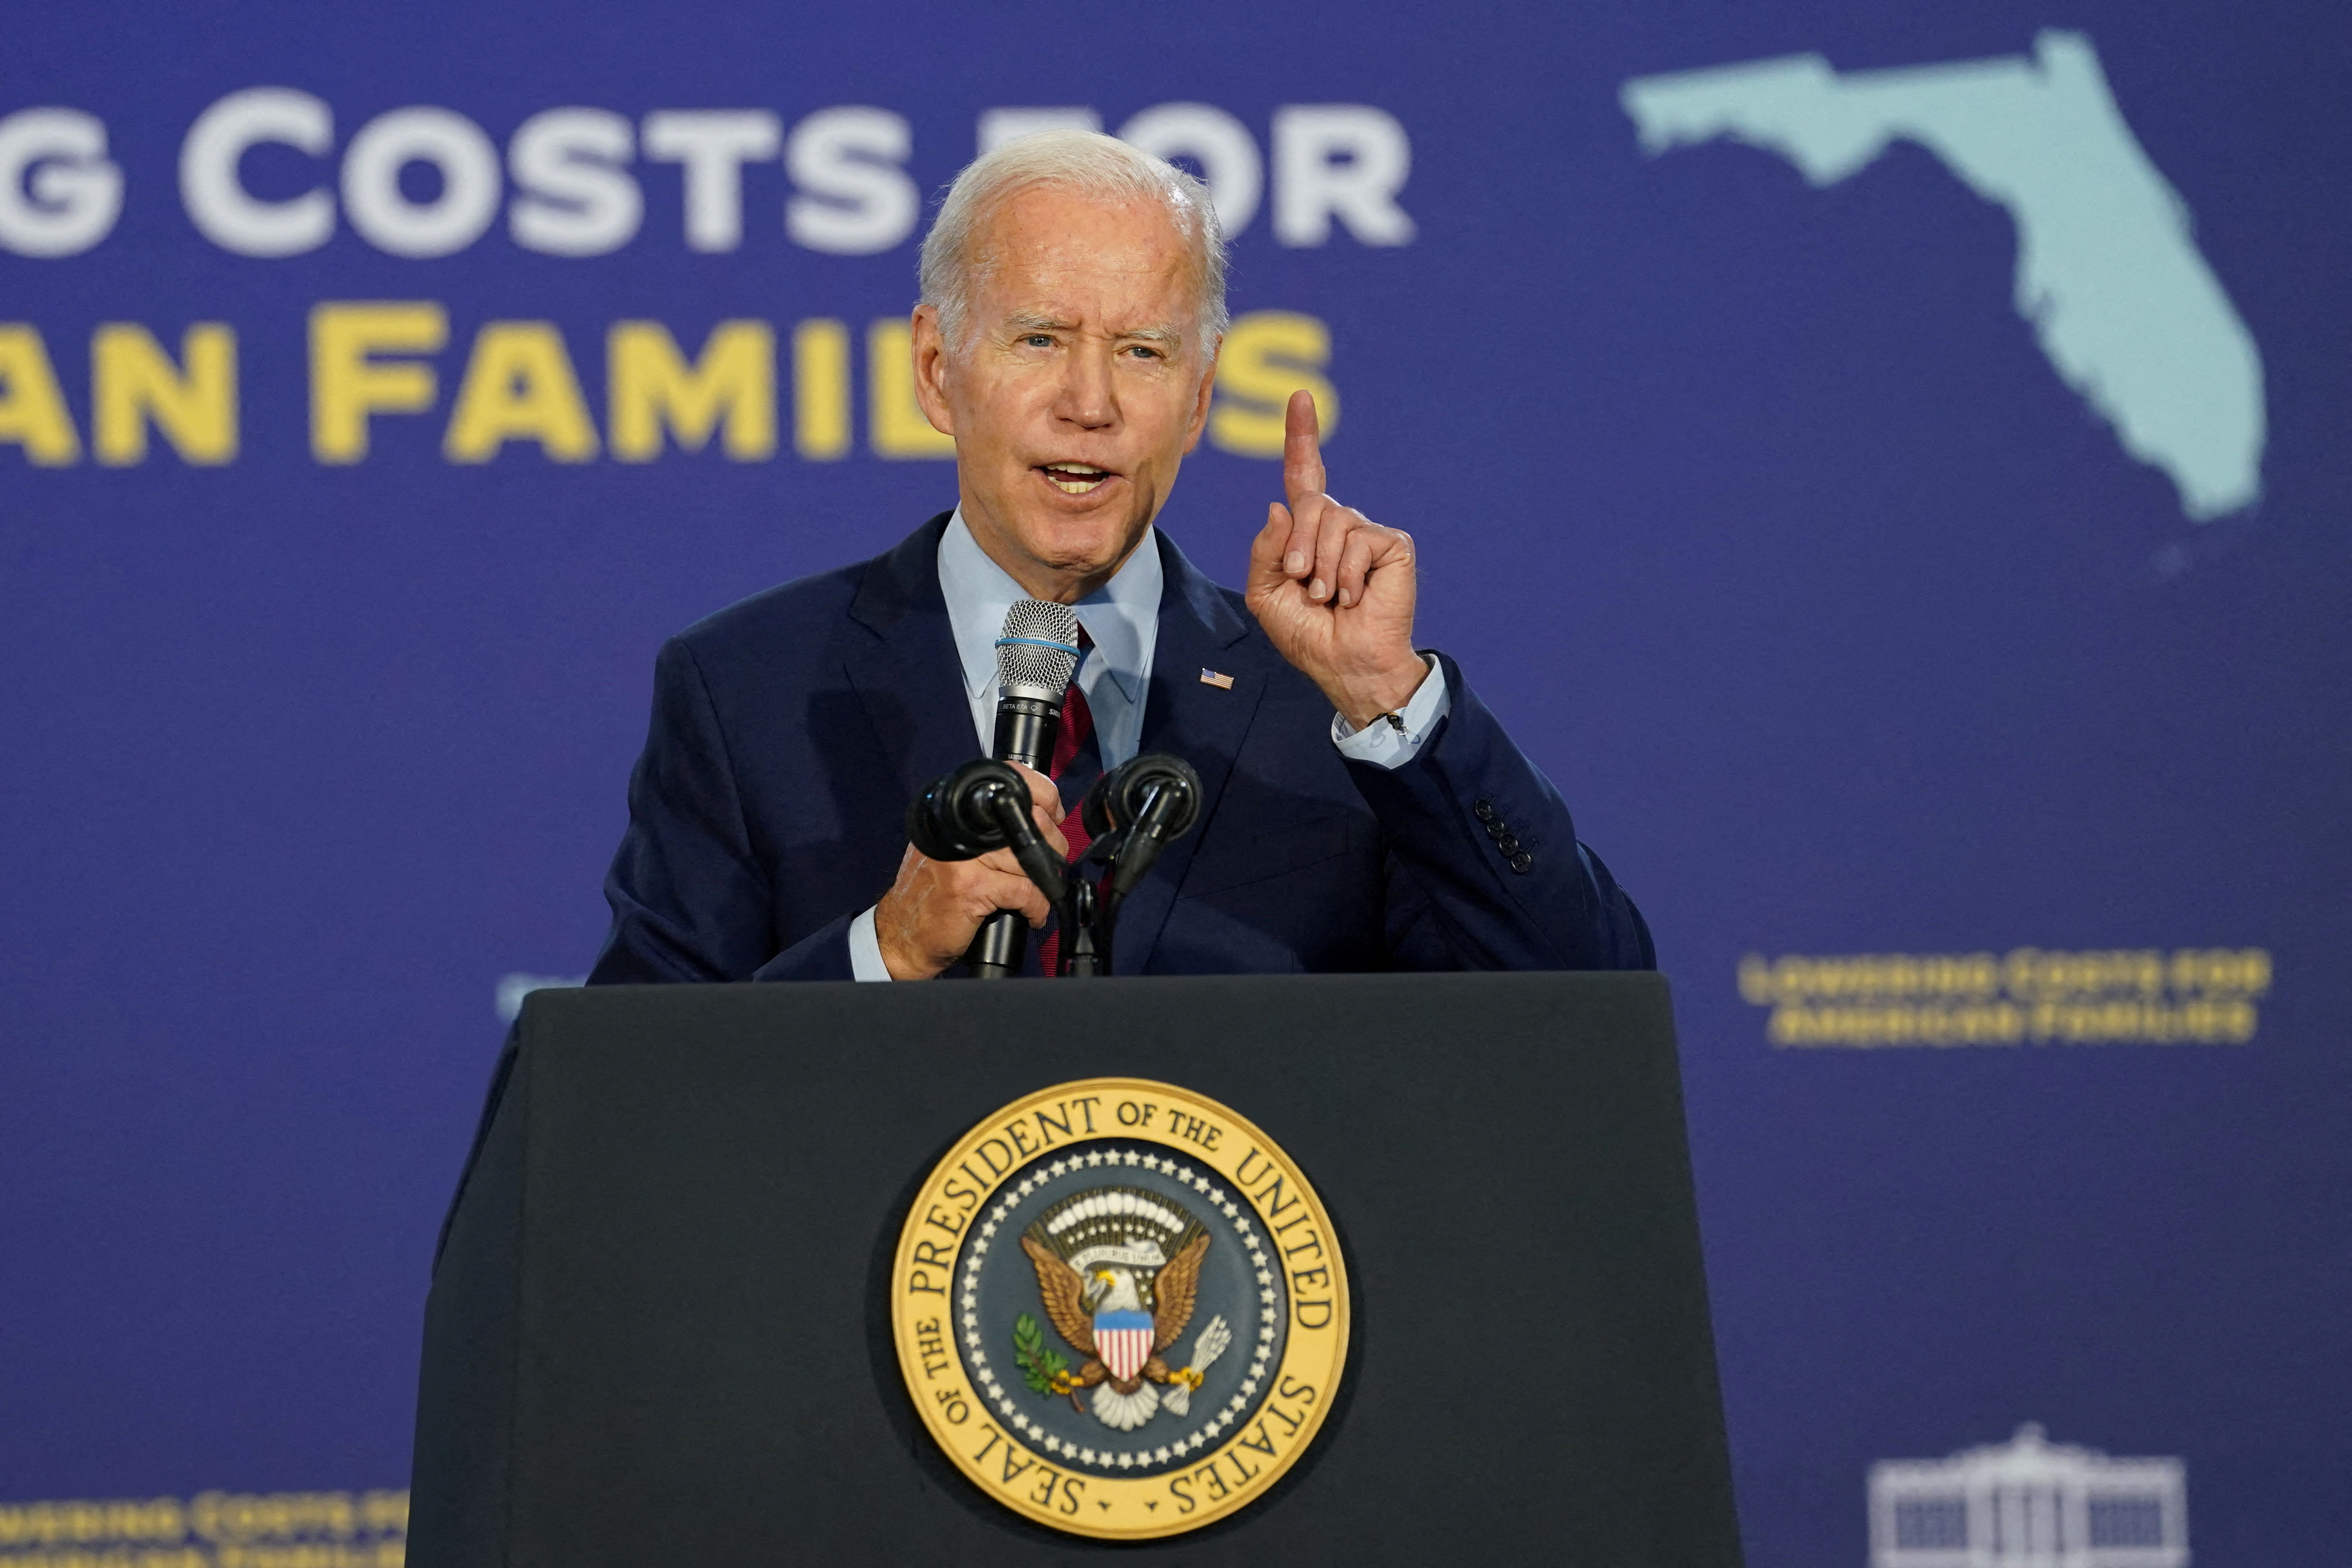 U.S. President Biden makes campaign visits ahead of midterms in Florida